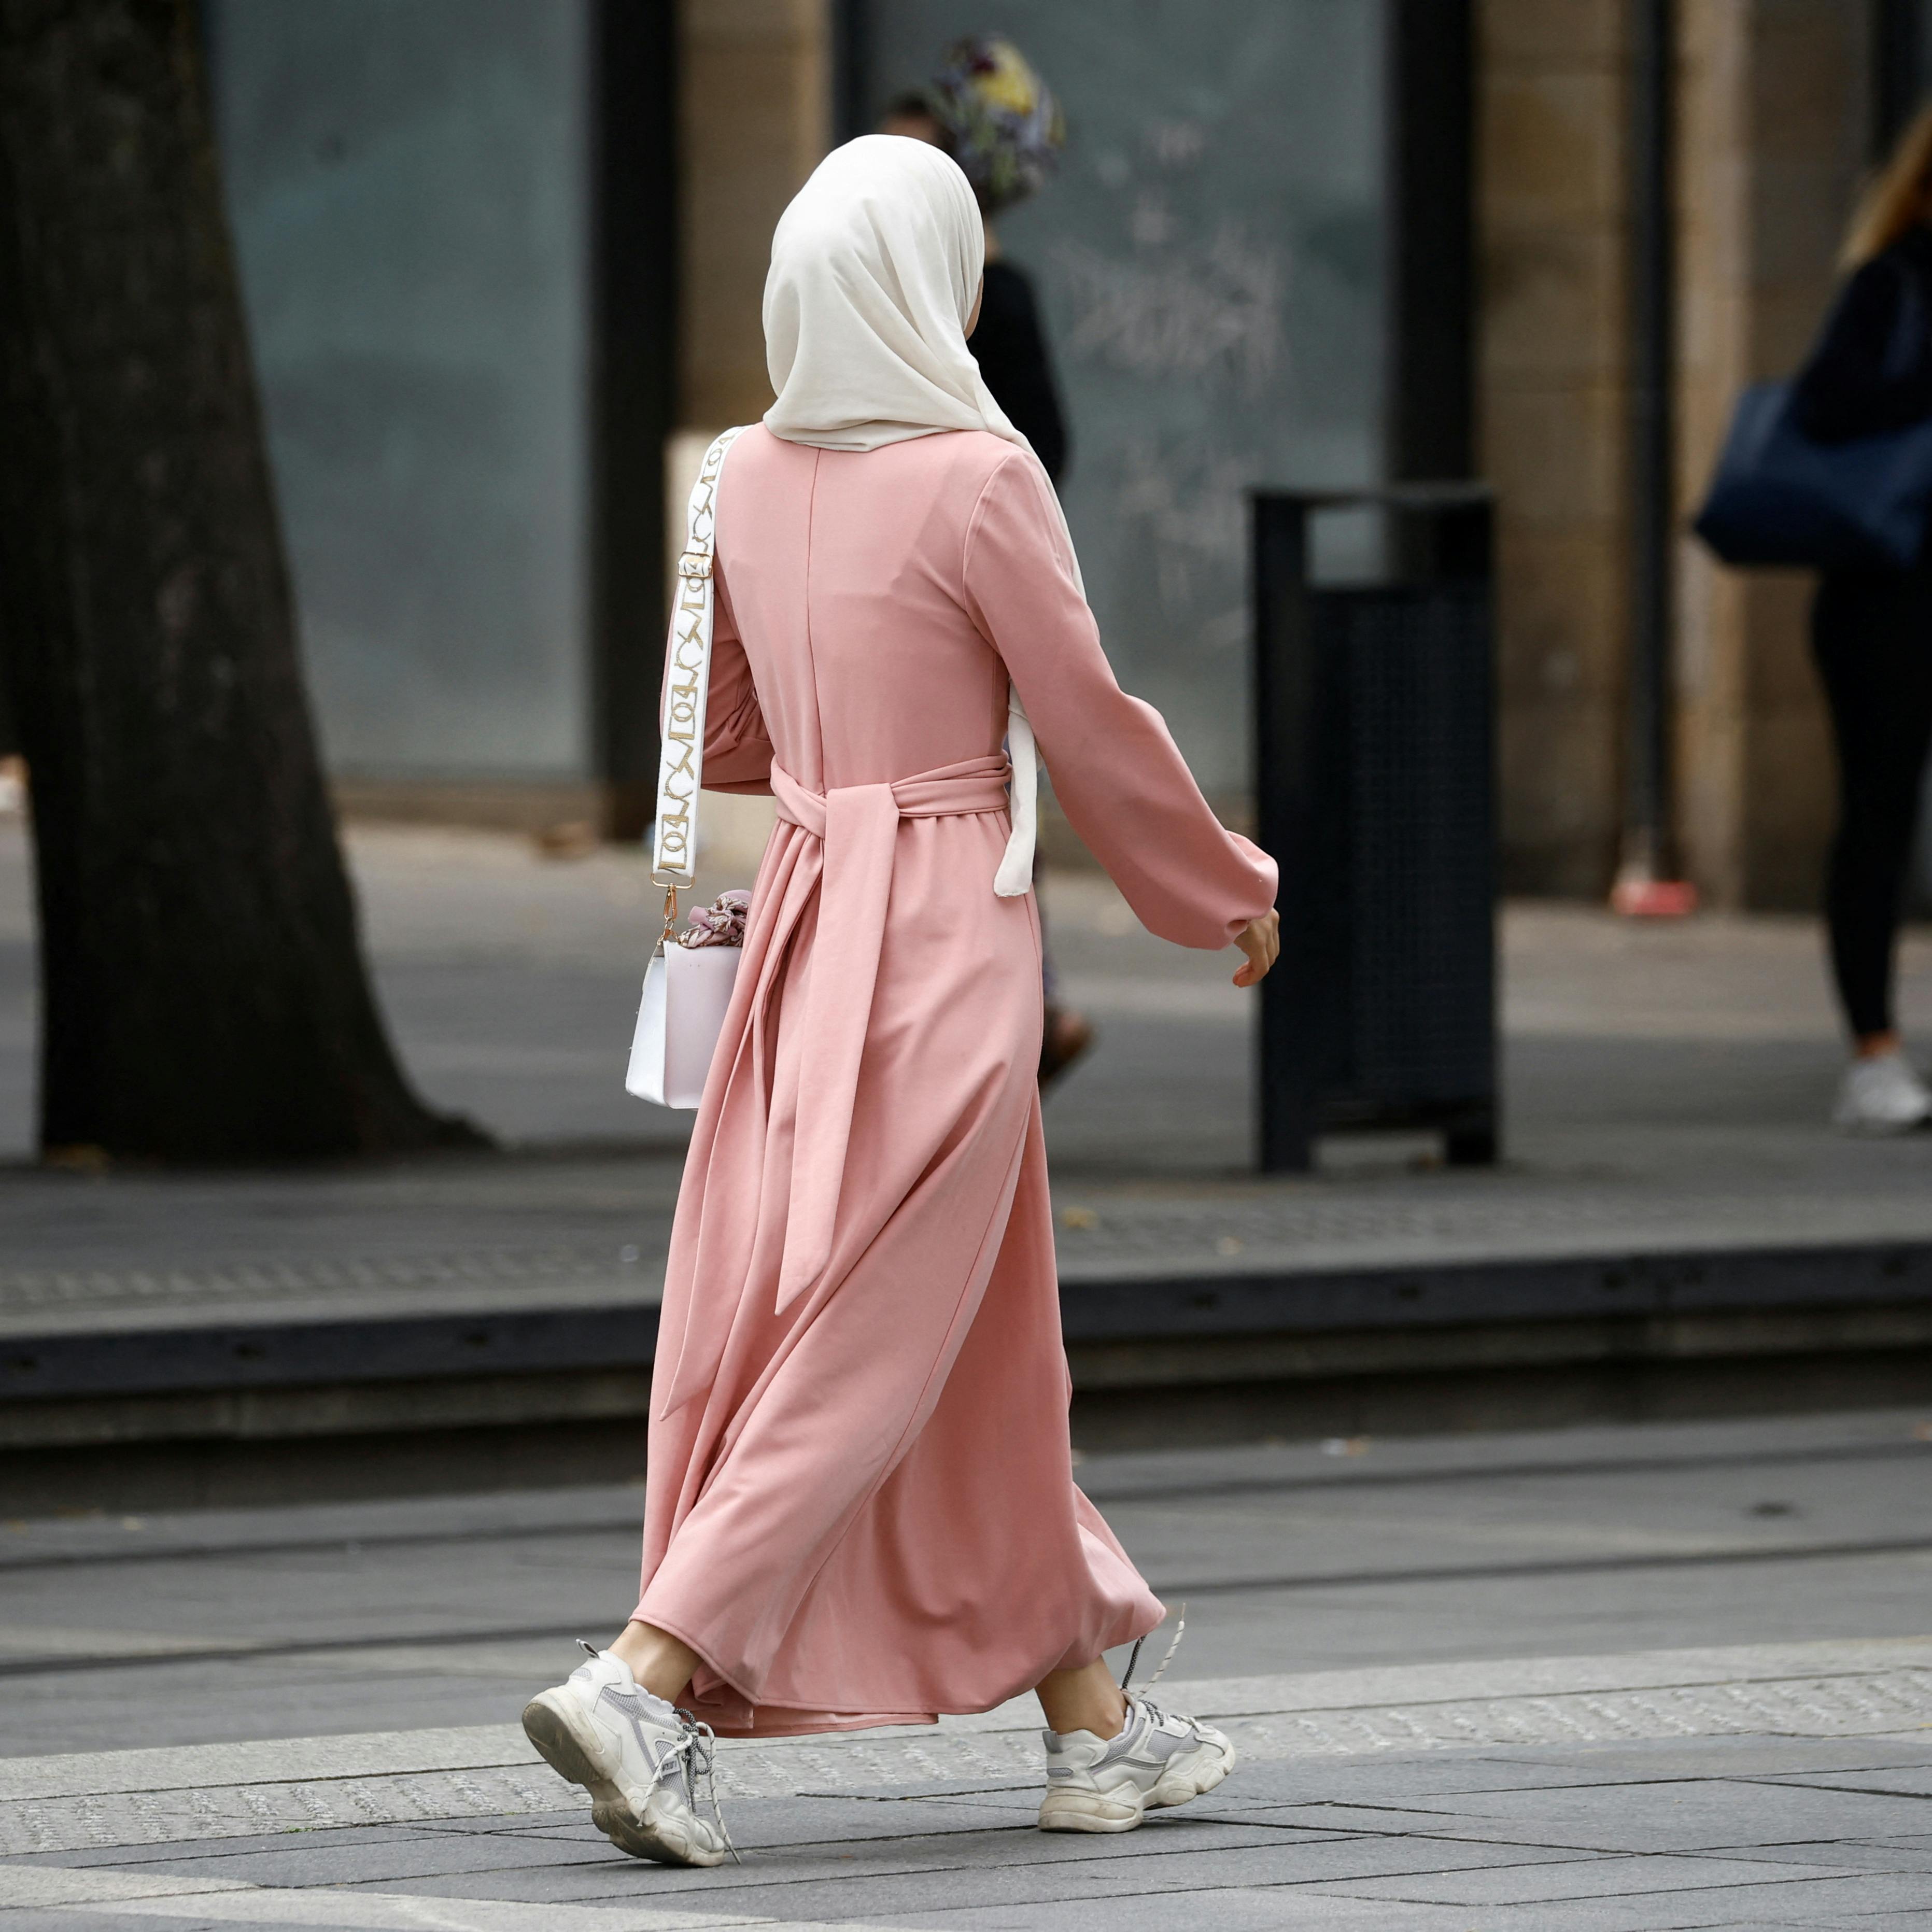 A Muslim woman, wearing the style of dress called an abaya, walks in a street in Nantes, France, August 29, 2023. REUTERS/Stephane Mahe